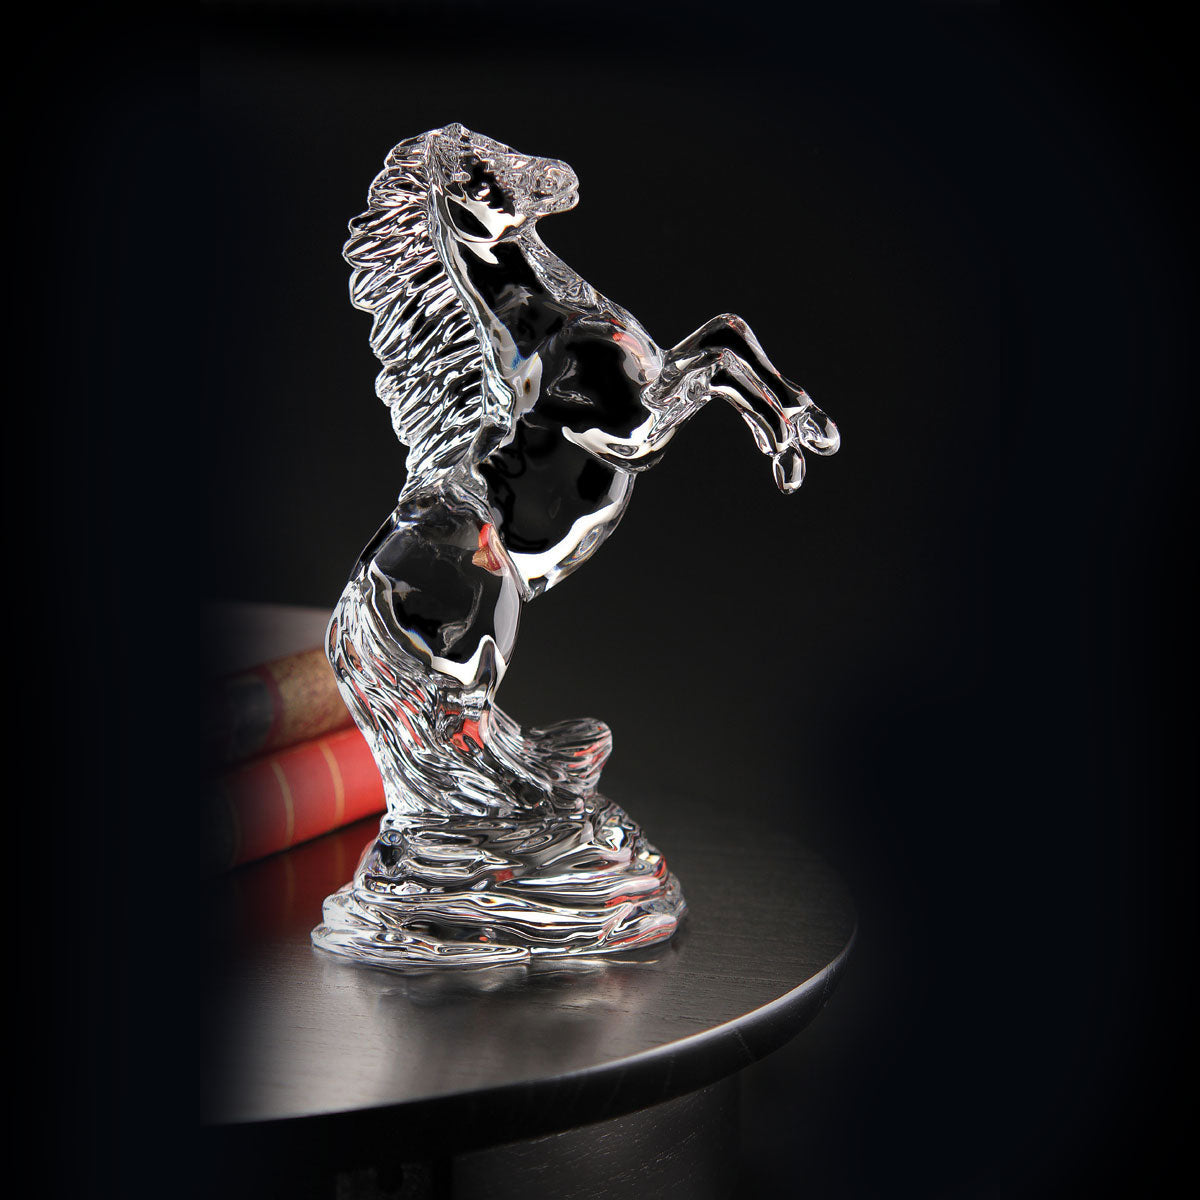 Waterford Crystal Rearing Horse Collectible  This Crystal figurine features a wild stallion rearing on its hind legs with its mane whipping in the wind on a textured base